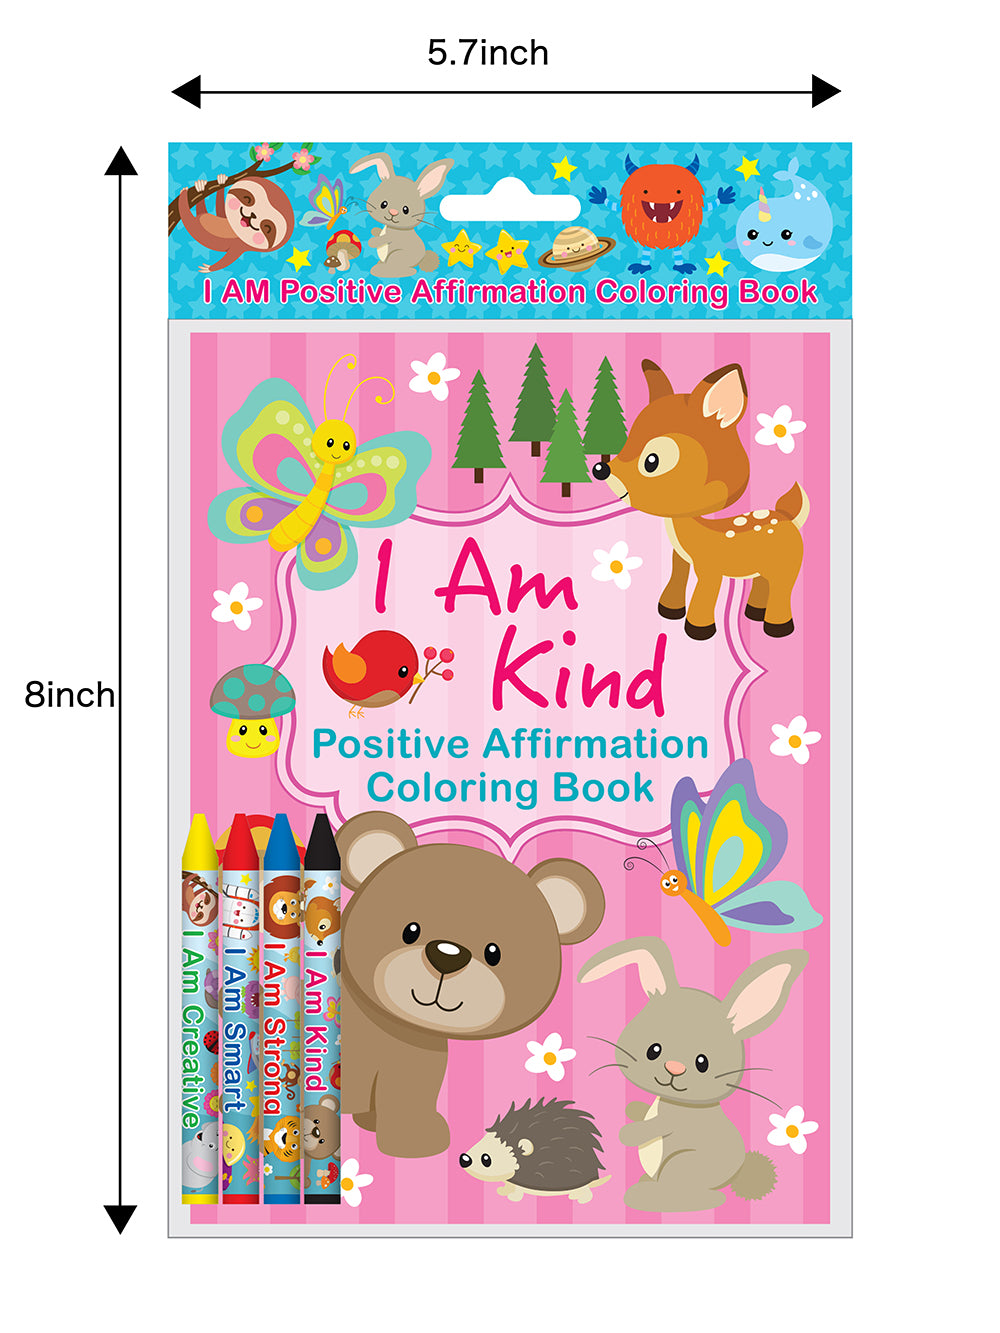 Sky's Mini Coloring Book of Affirmations — Drops and BowTales